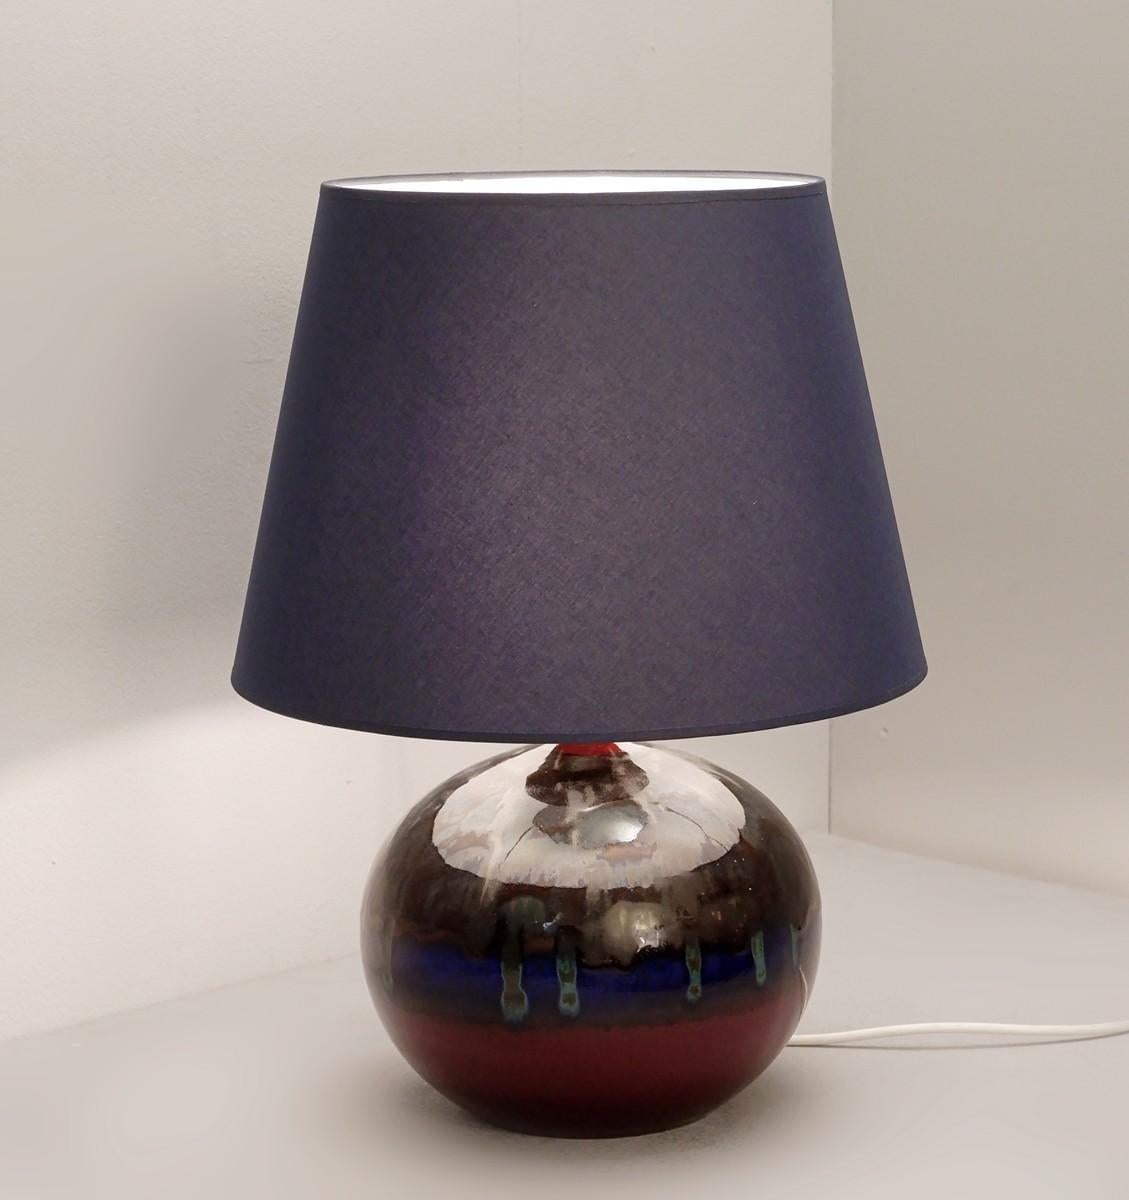 German pottery table lamp by 1814 Hutschenreuther Le Lion, 1960s